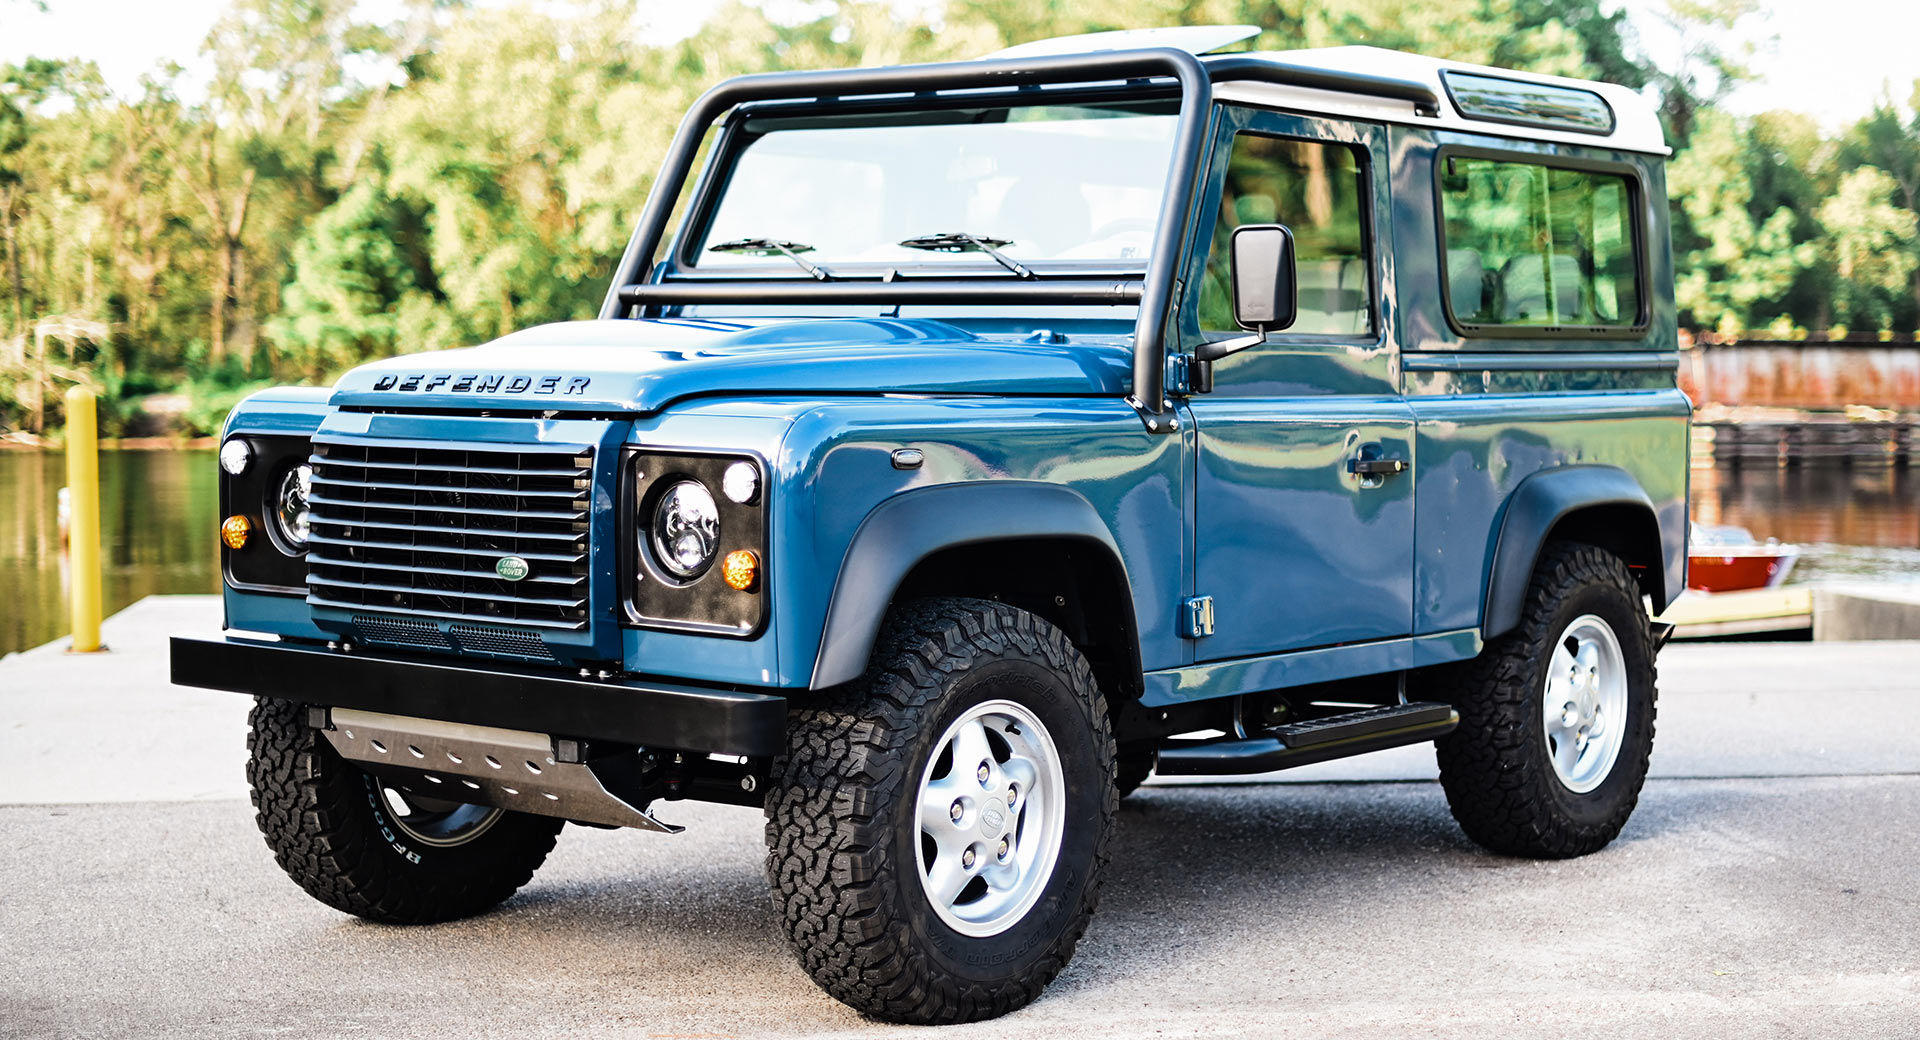 A Land Rover Defender stands tall and proud in this captivating image.